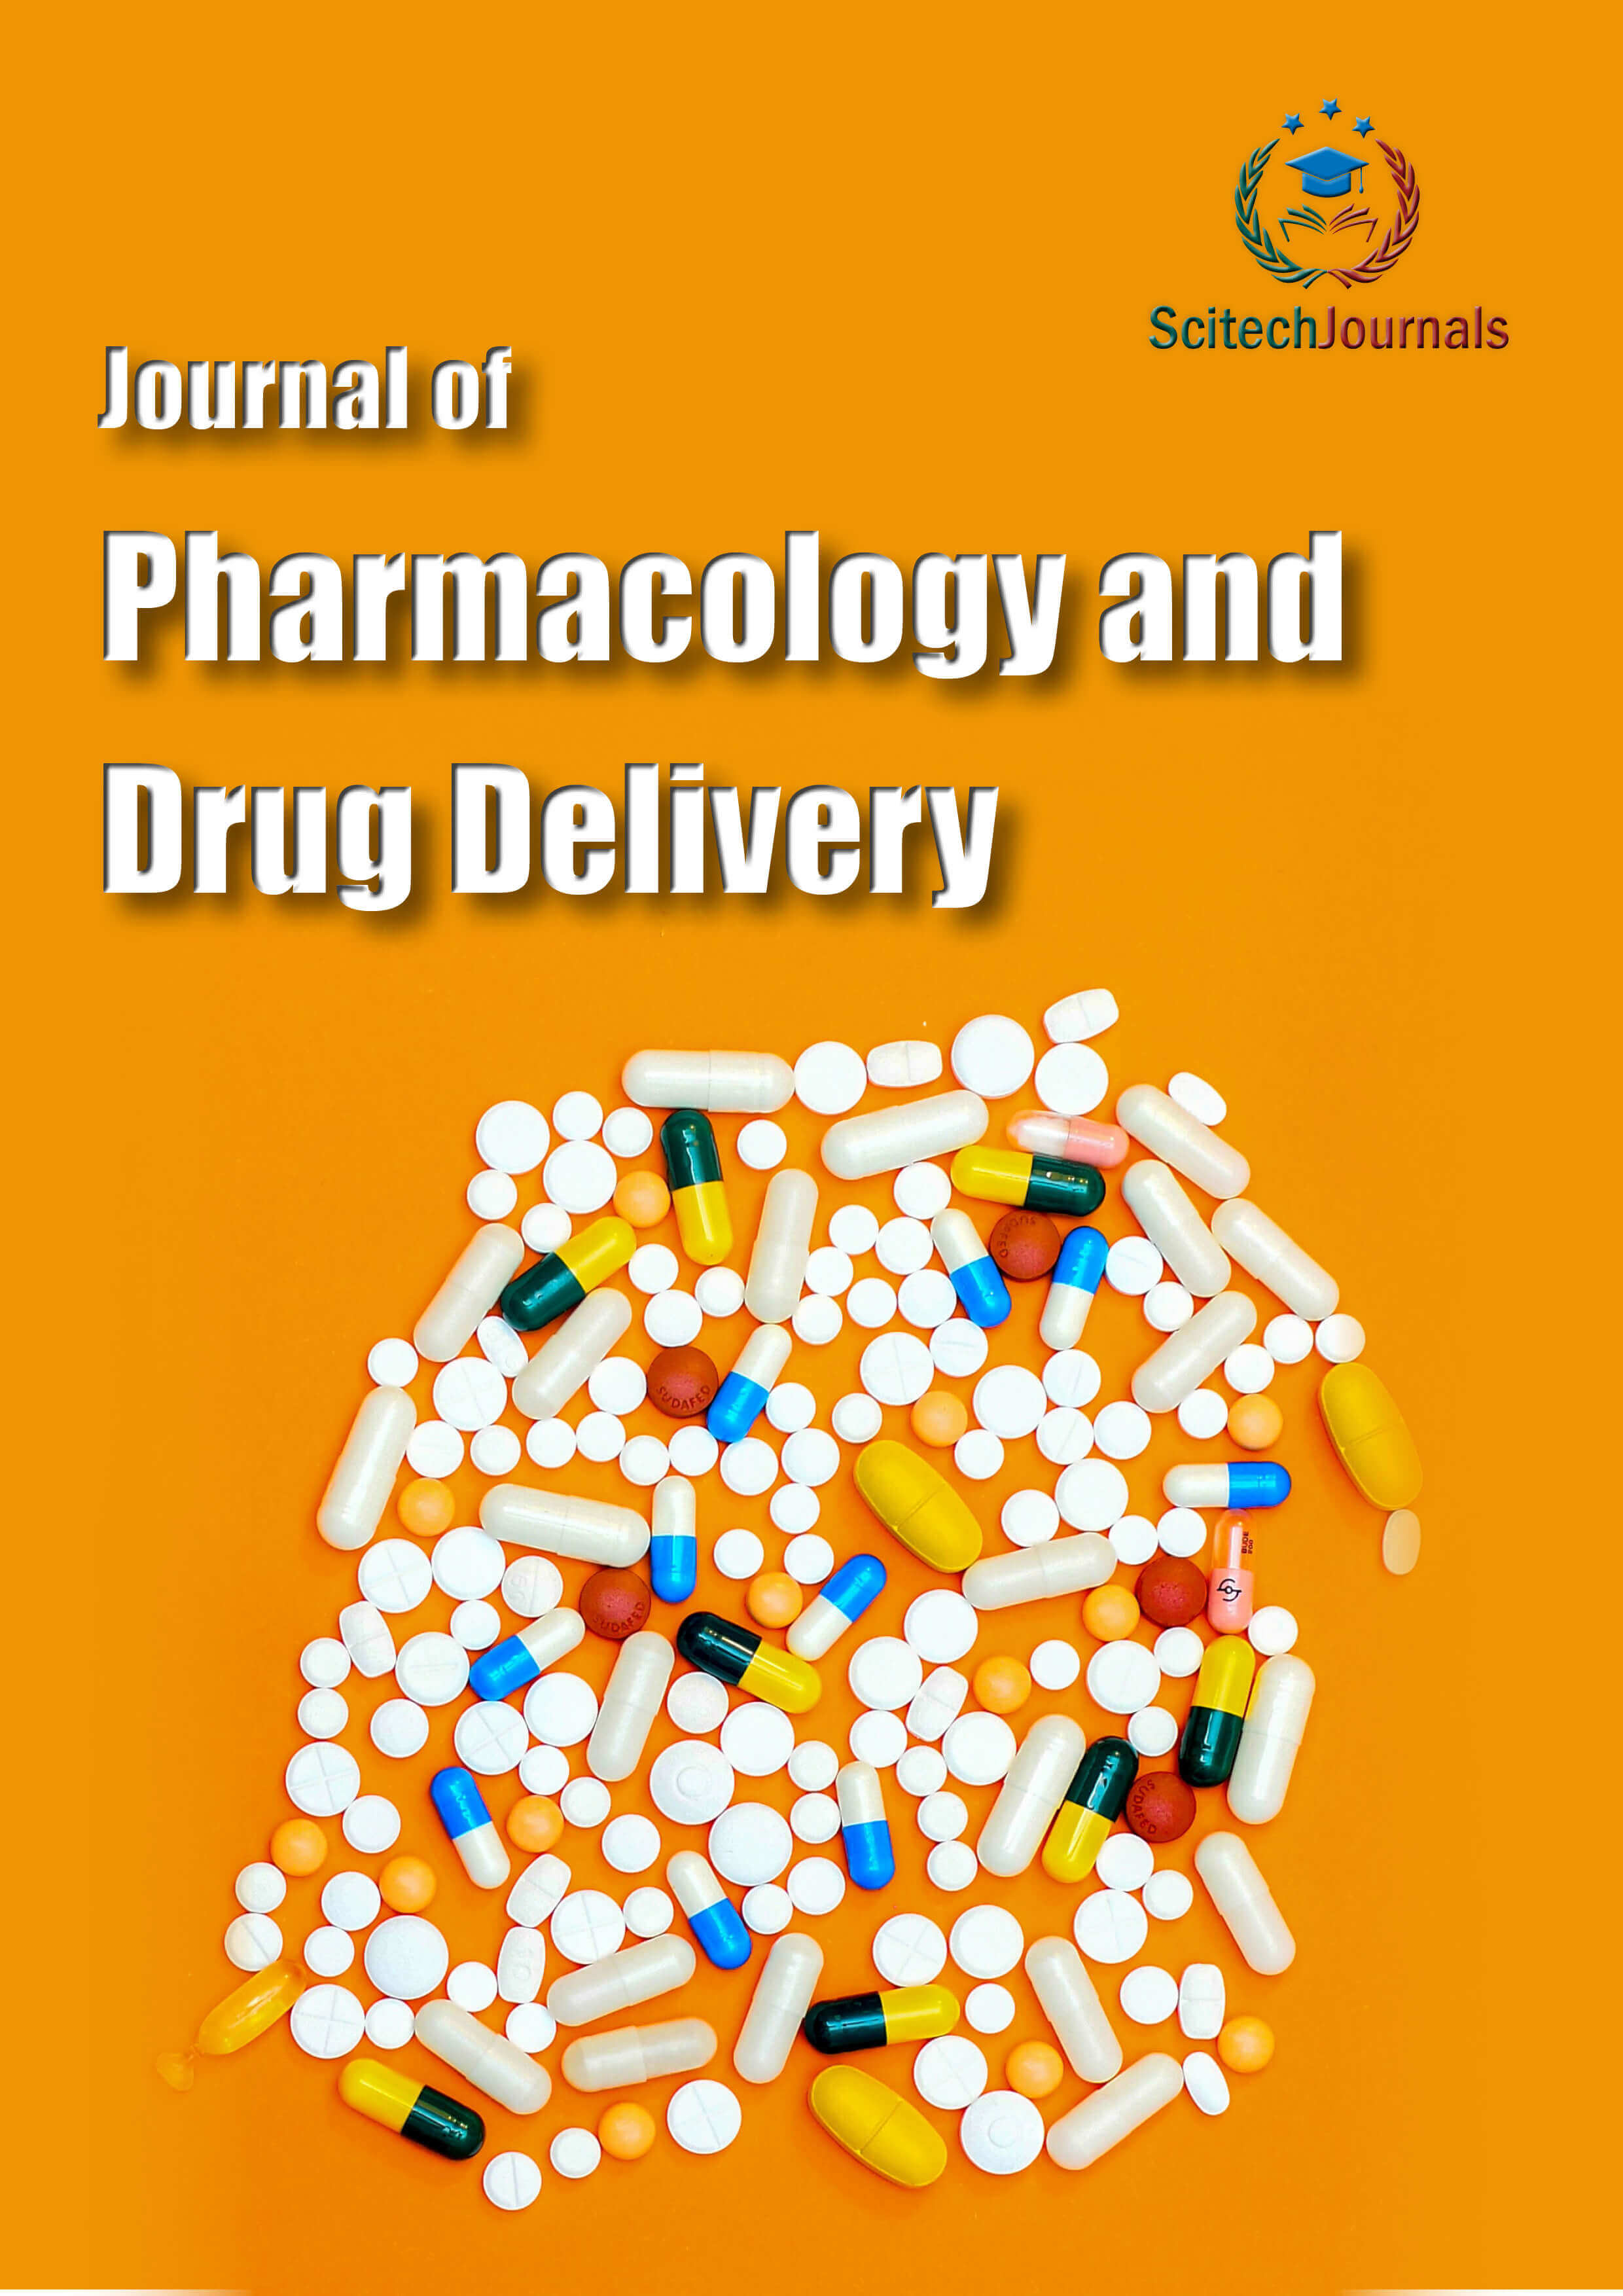 Journal of Pharmacology and Drug Delivery